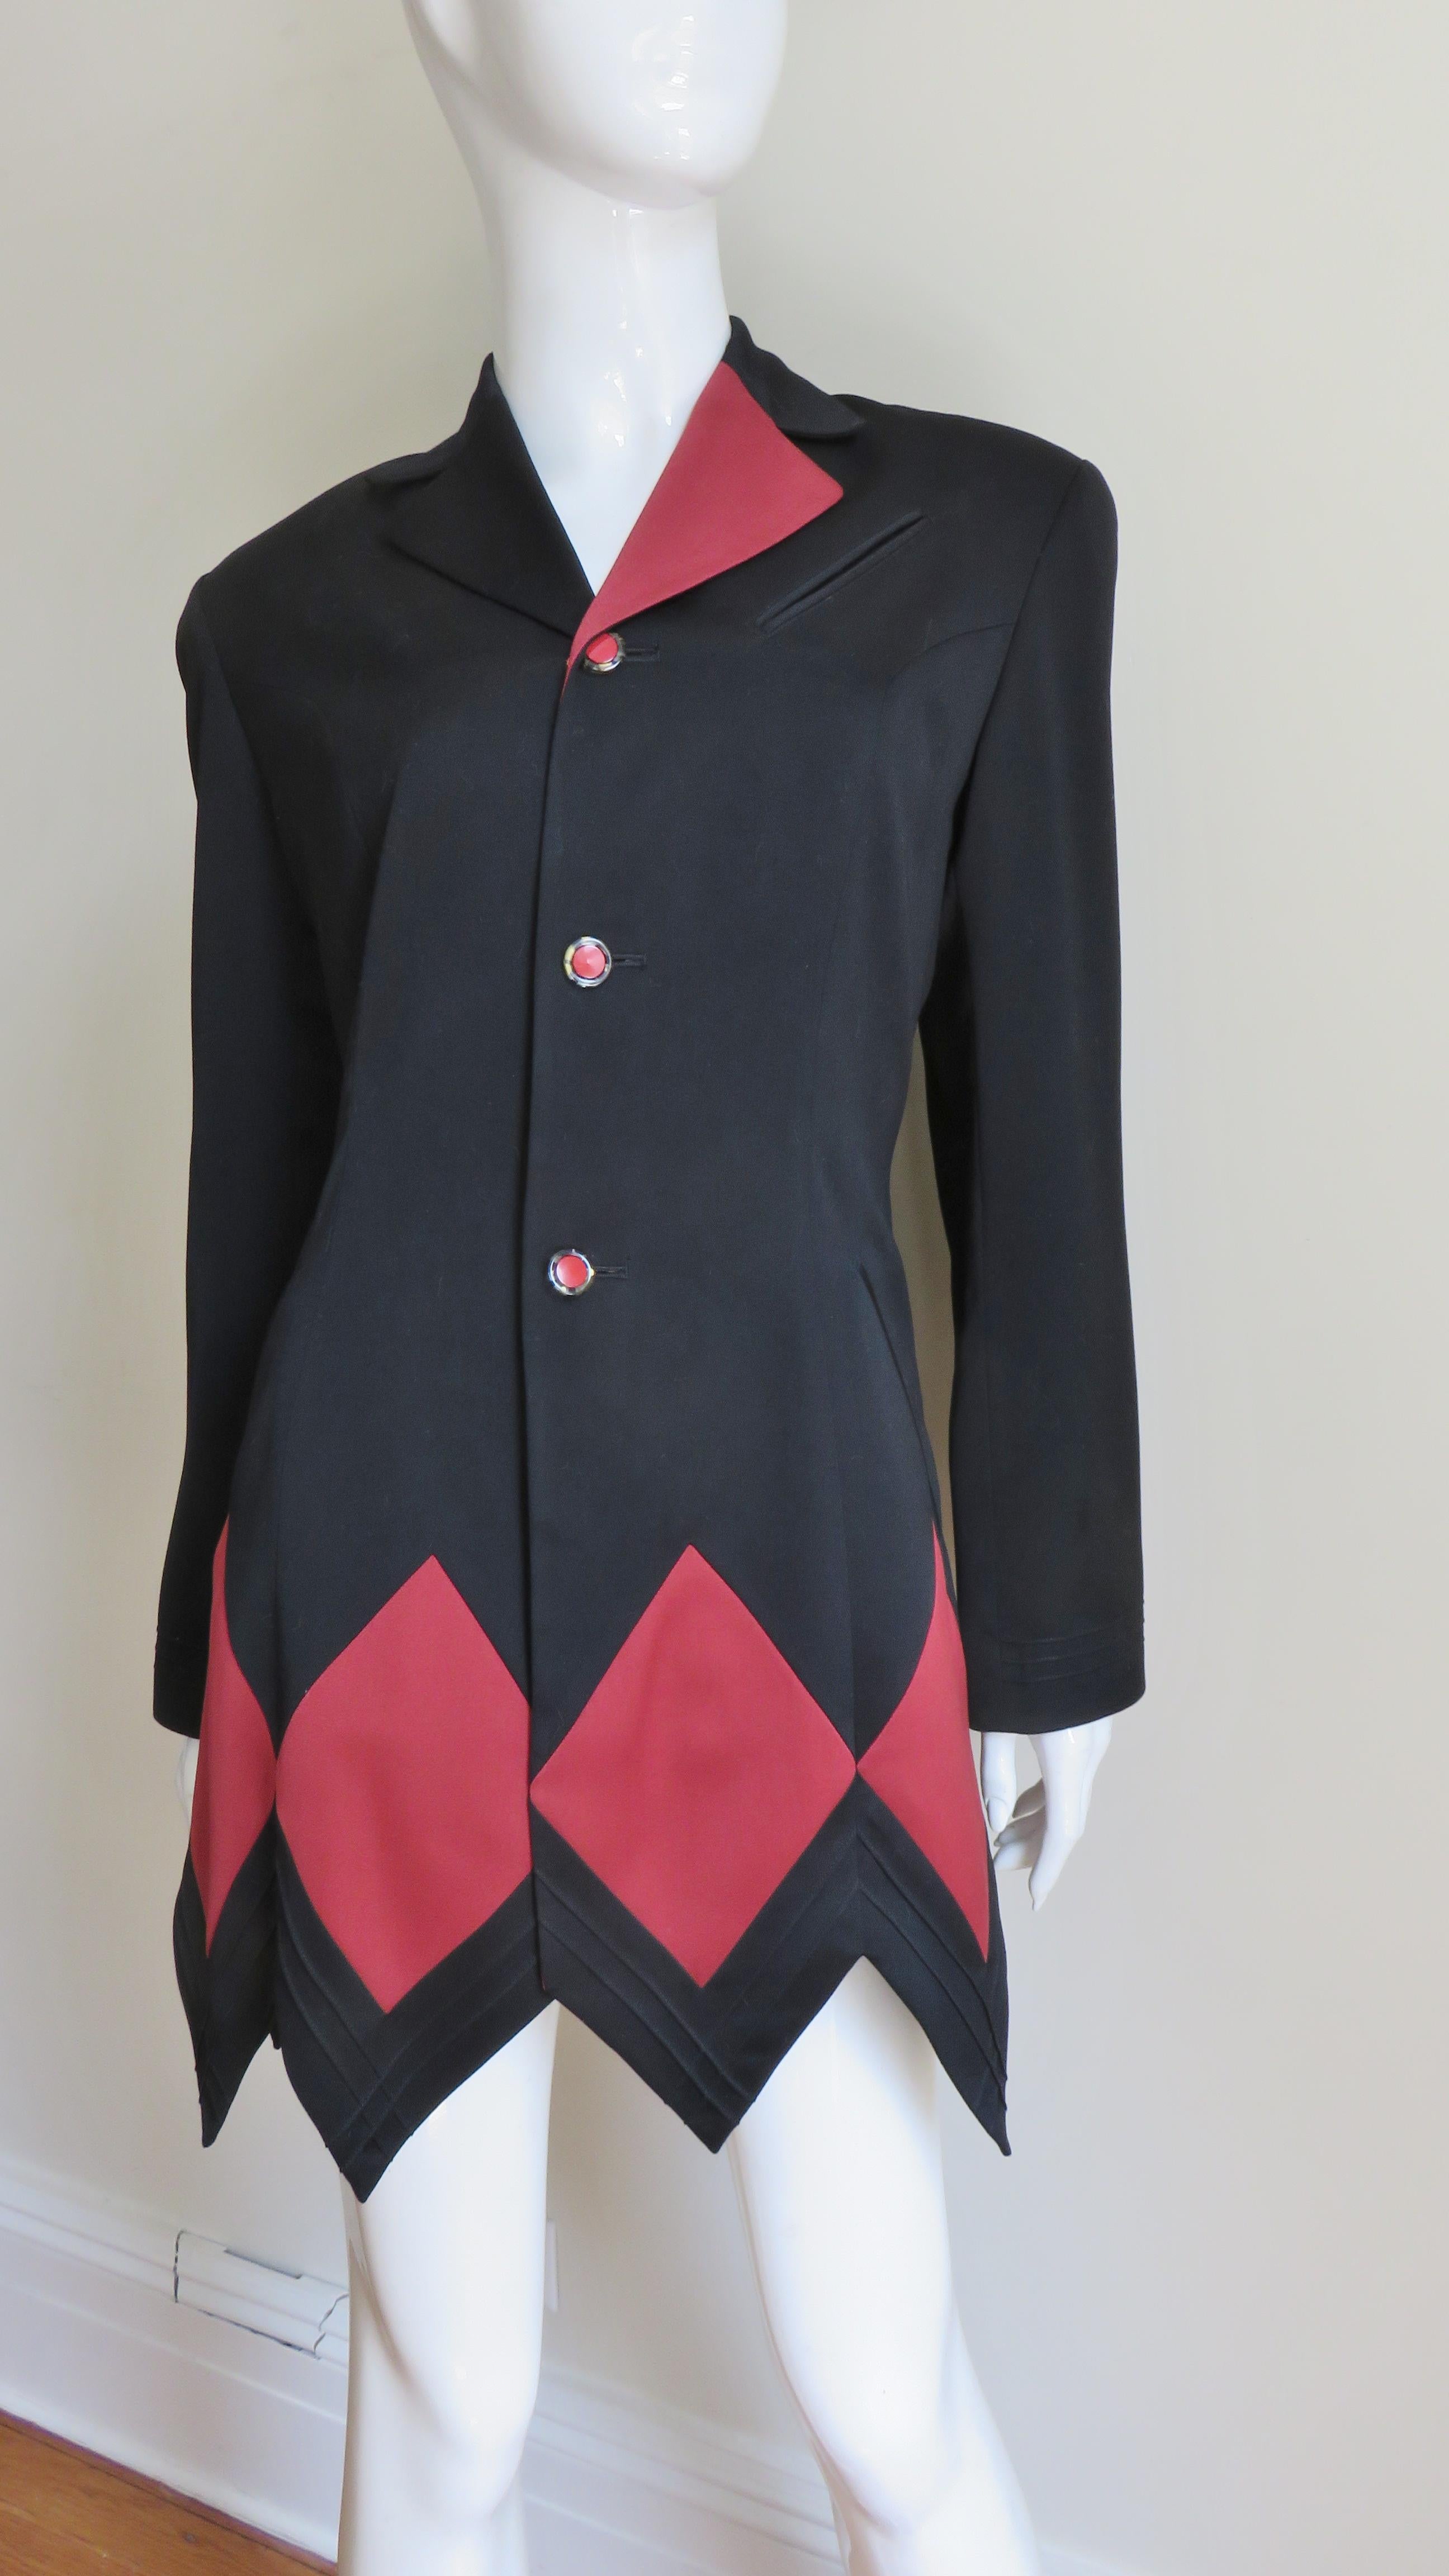 A fabulous black wool jacket with a red harlequin patchwork pattern.  It has a lapel collar, one side red and the other black, light shoulder pads, and a zig zag hemline following the lines of the individually appliqued red diamond shapes around the